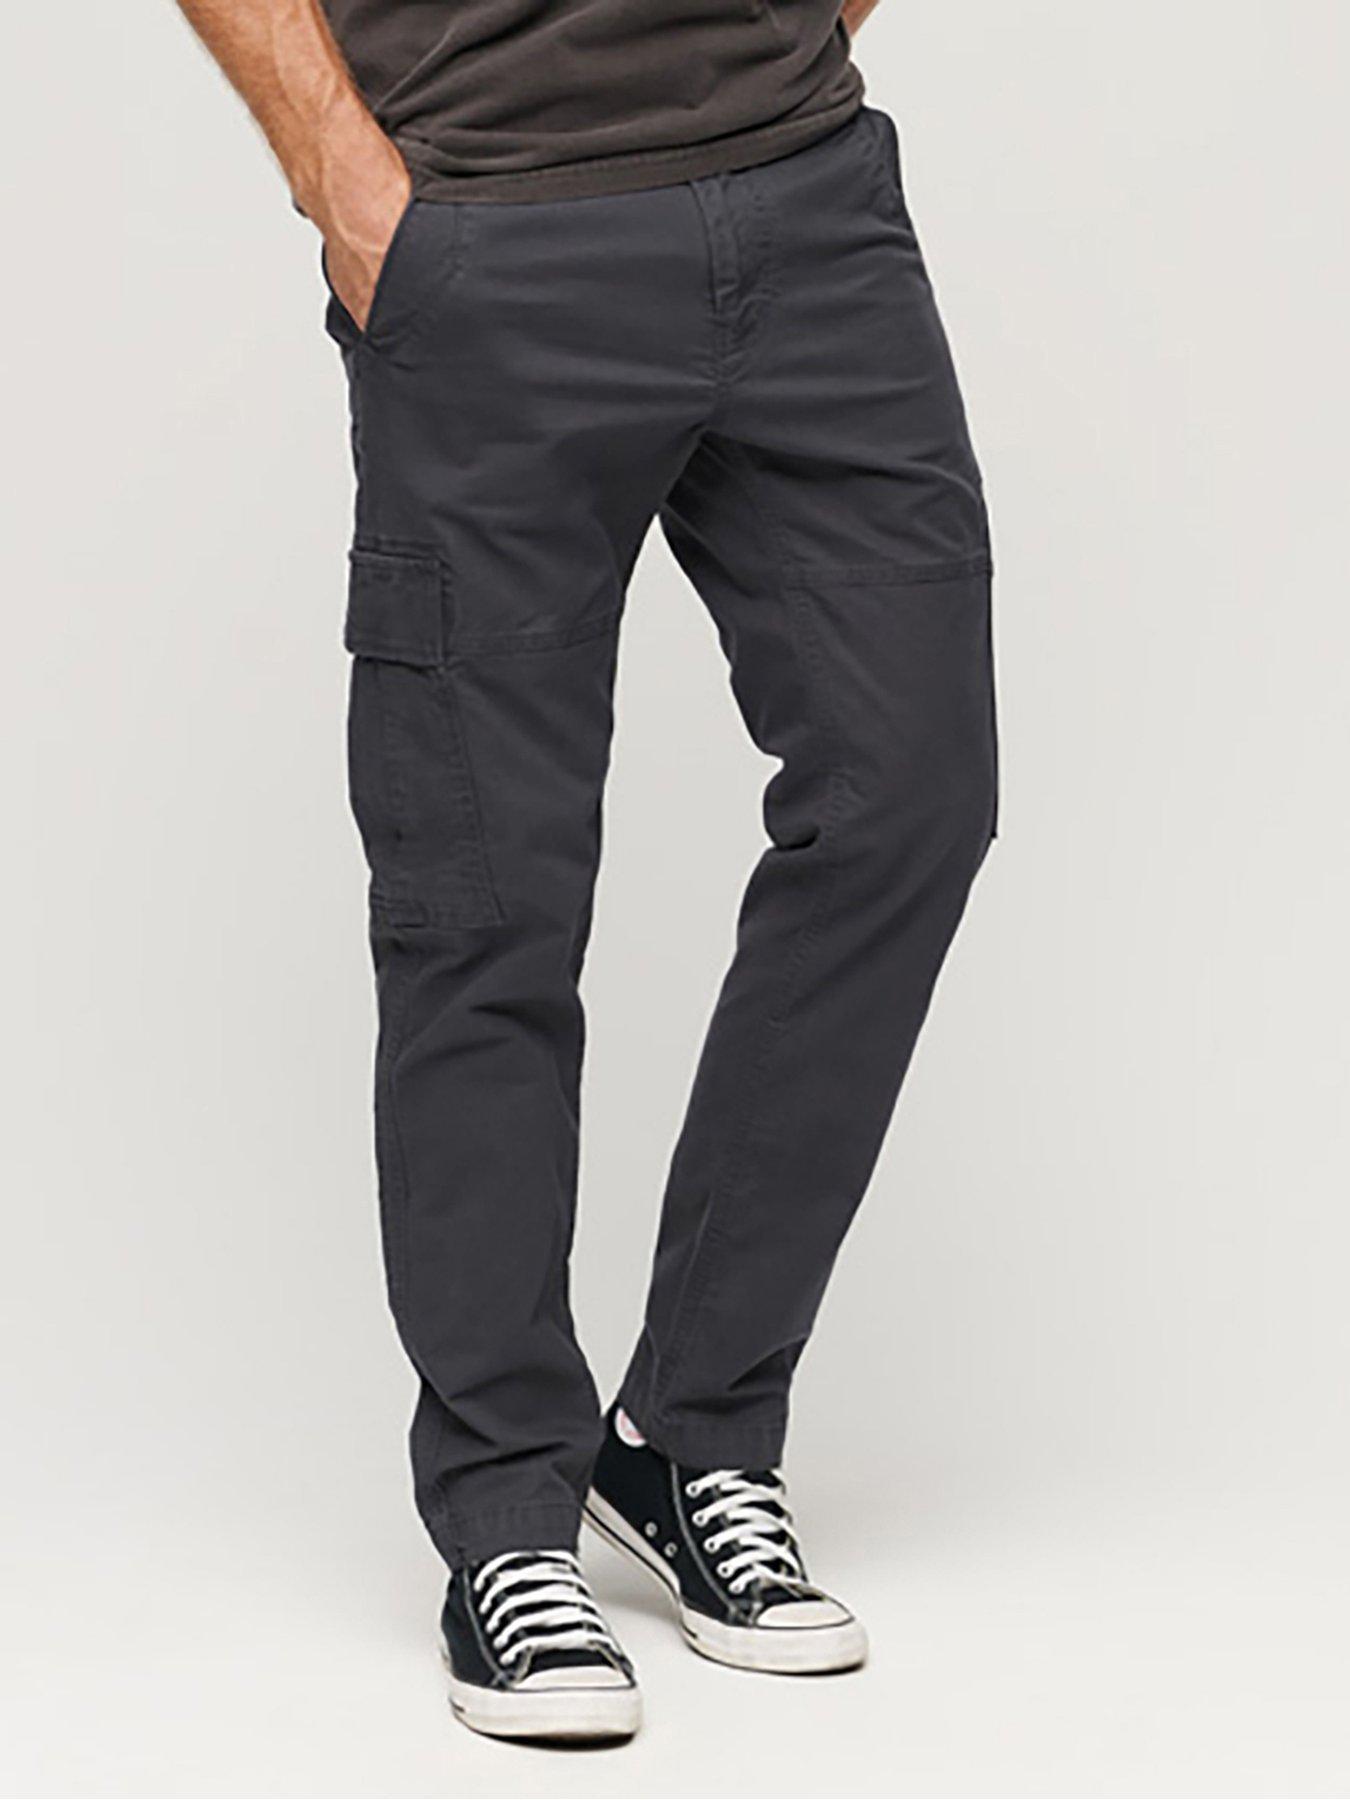 Superdry Ultimate Rescue Ski Trousers - Black